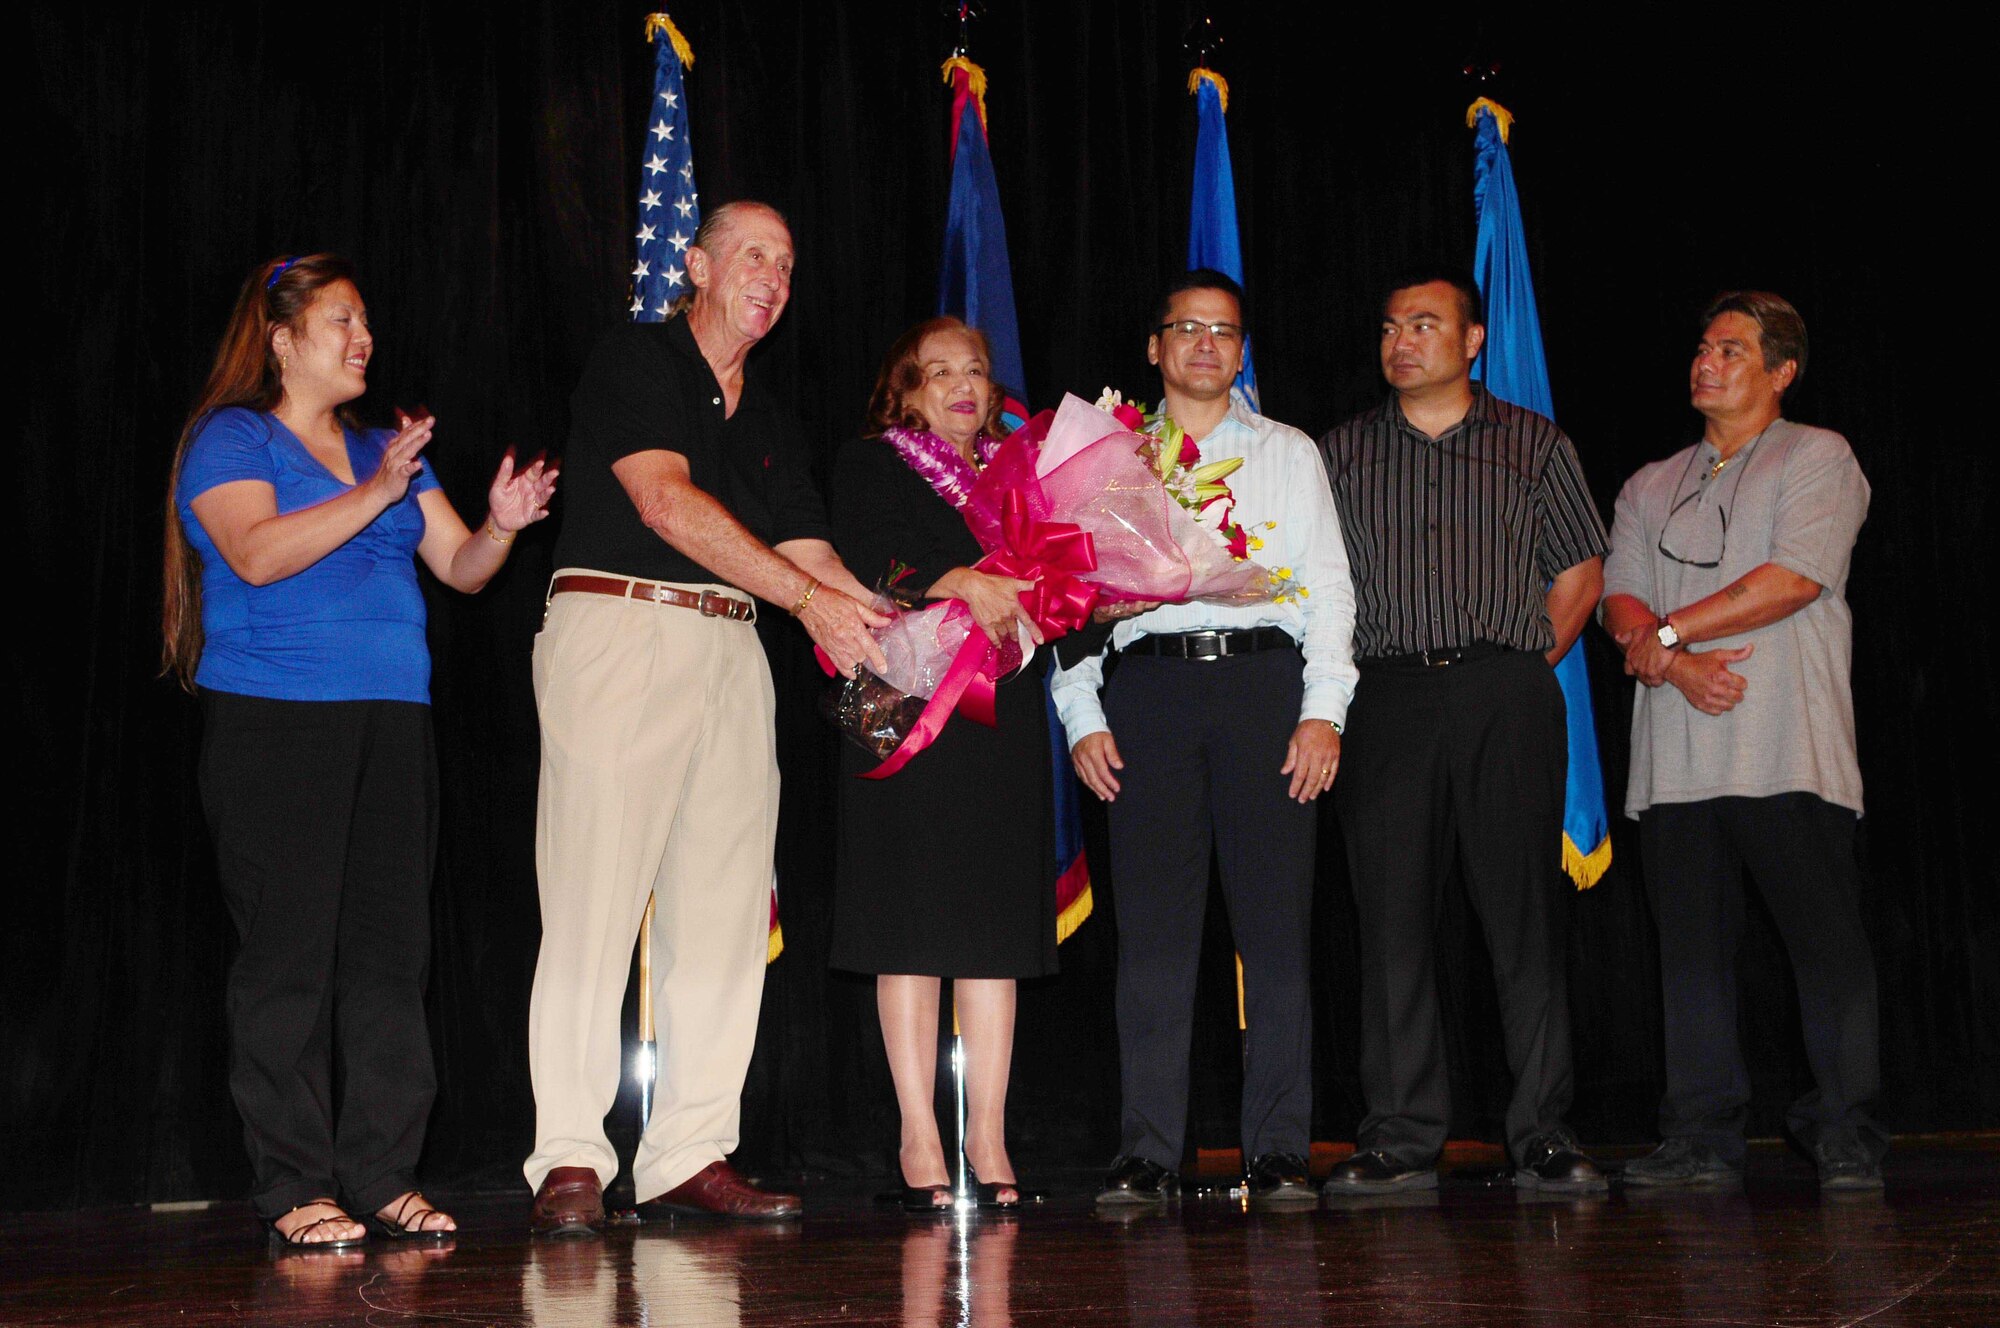 TUMON, Guam - Joyce Martratt, 36th Wing administrative assistant, receives recognition from her family for her 44 years of civilian service here May 7. Mrs. Martratt was recognized for her outstanding service for the Air Force by friends, family and Team Andersen members. (U.S. Air Force photo by Airman 1st Class Jeffrey Schultze)